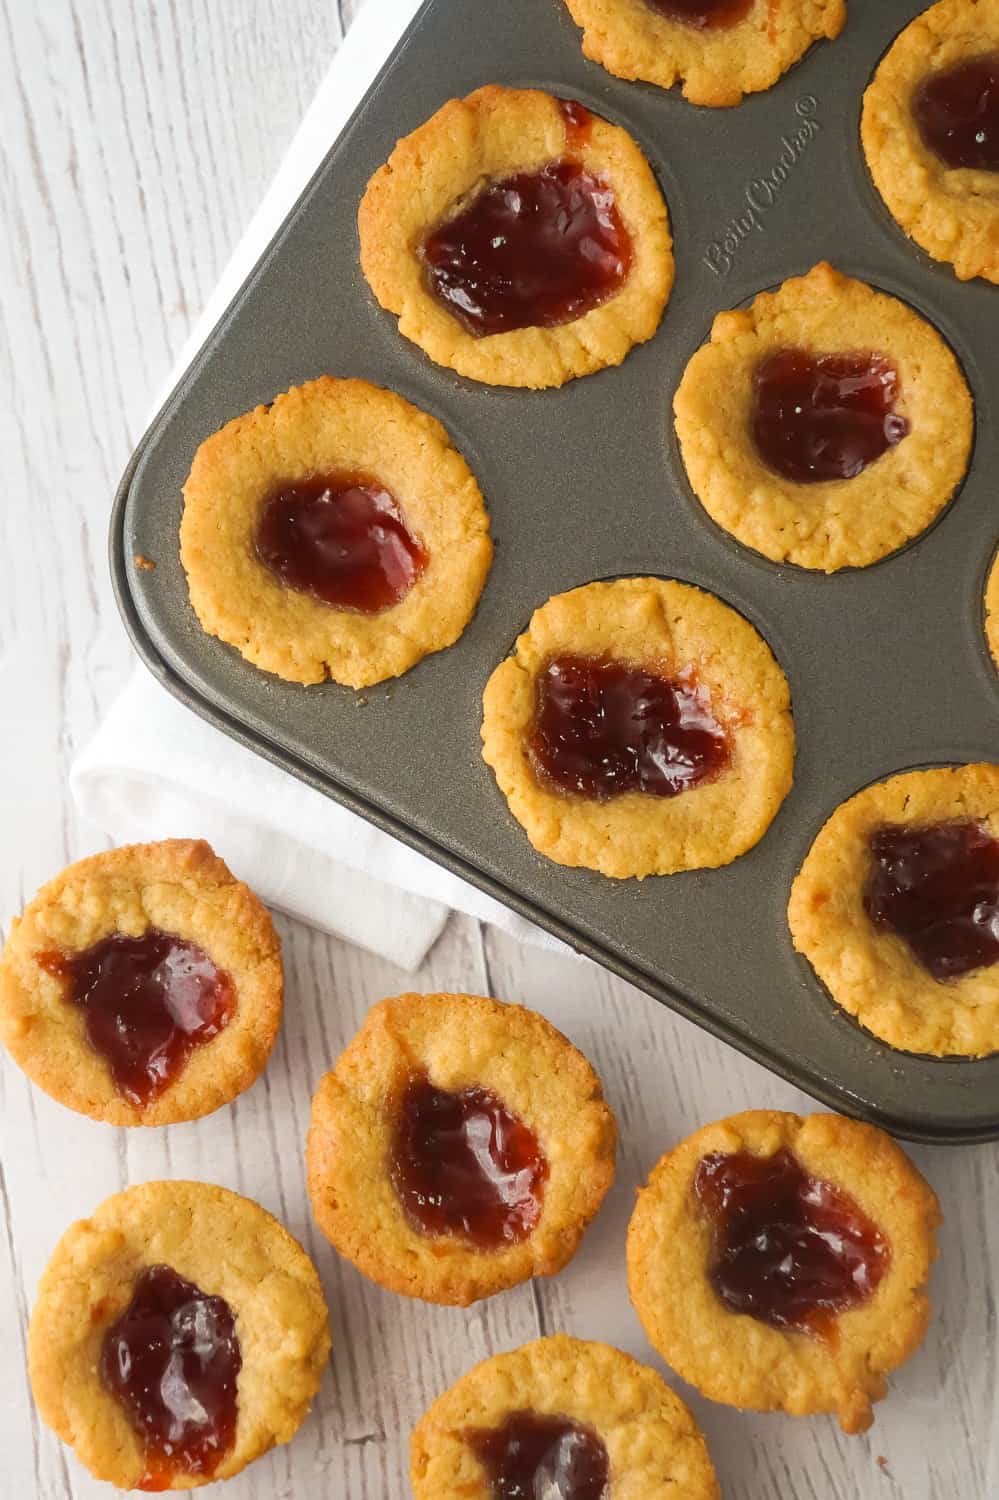 Peanut Butter and Jelly Blondie Bites are a delicious bite sized dessert baked in mini muffin tins. These peanut butter blondies are topped with strawberry jam and baked to perfection.